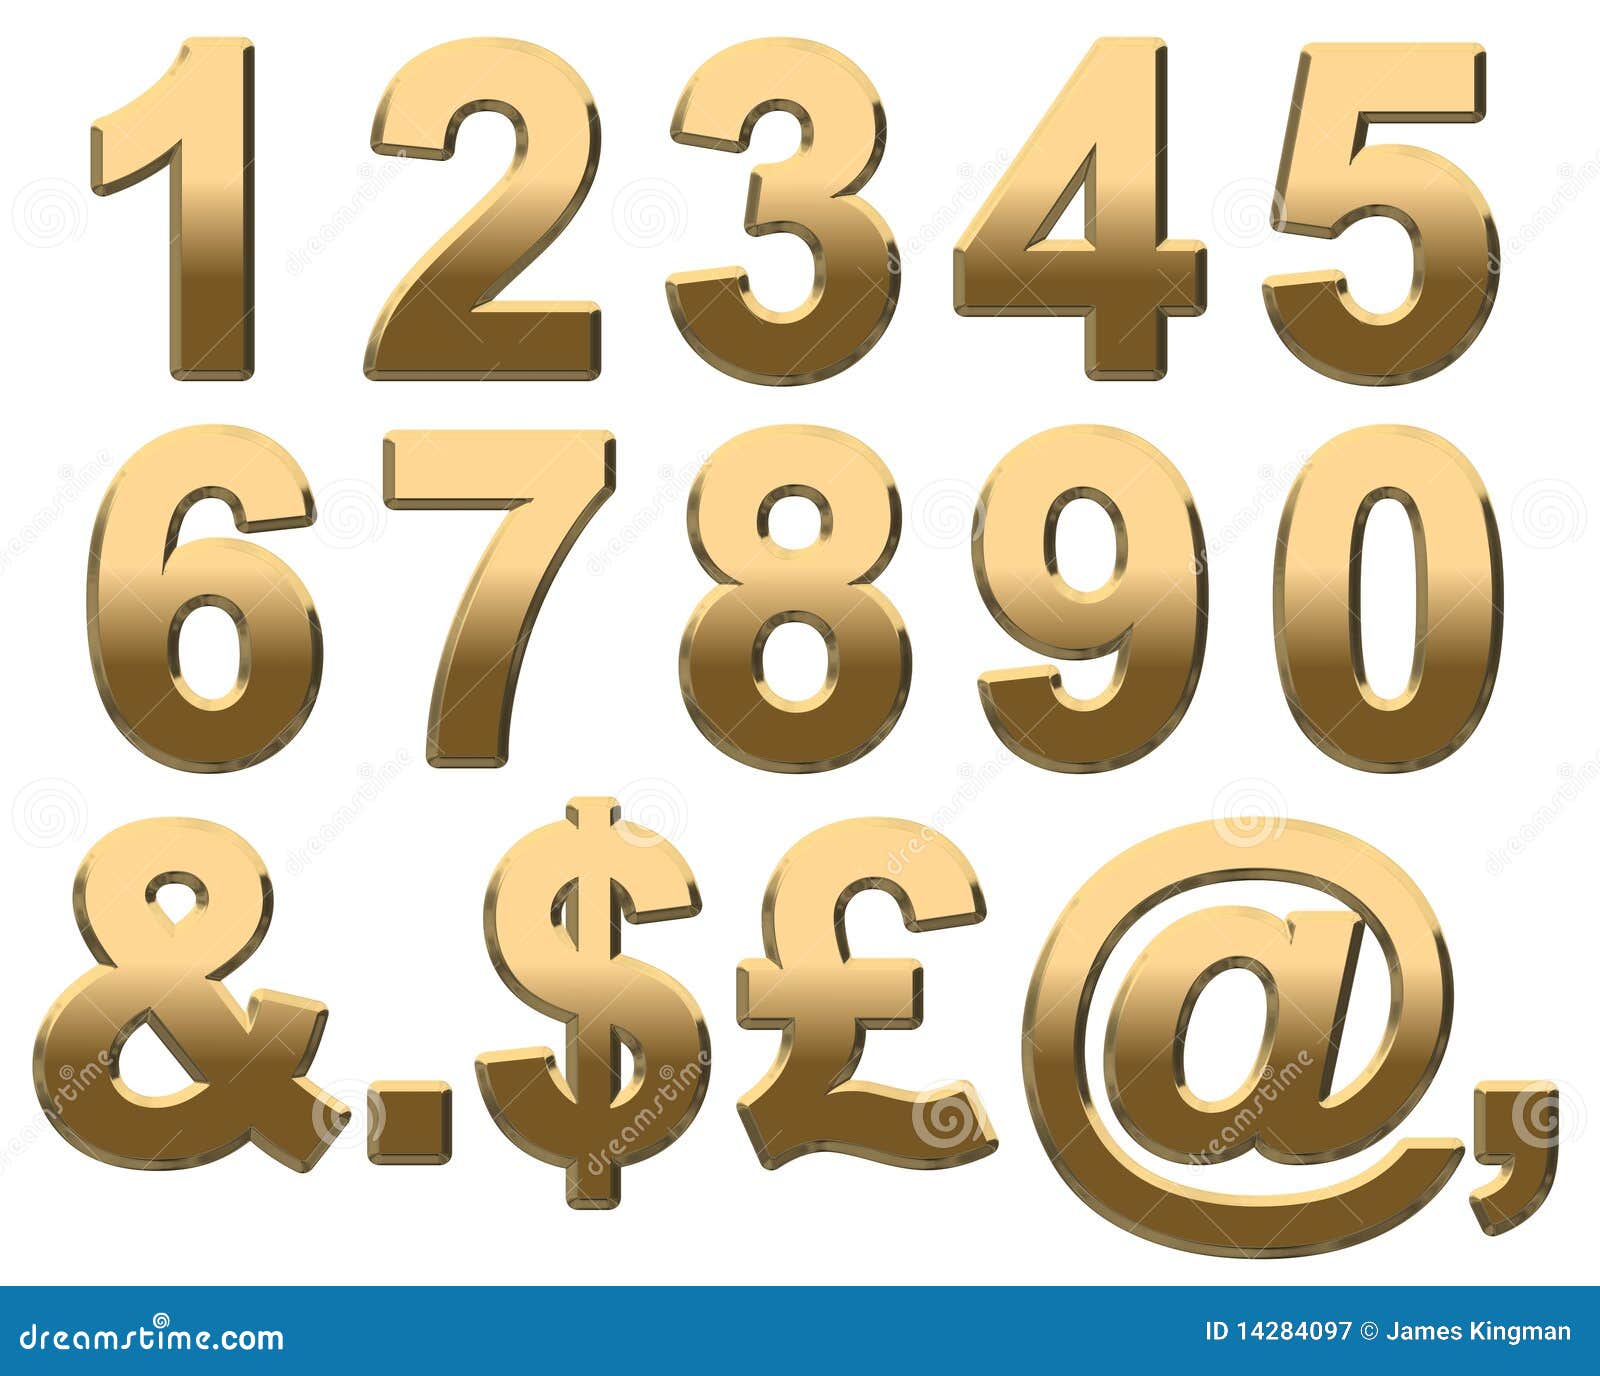 Royalty Free Stock Photography: Gold Numbers On White